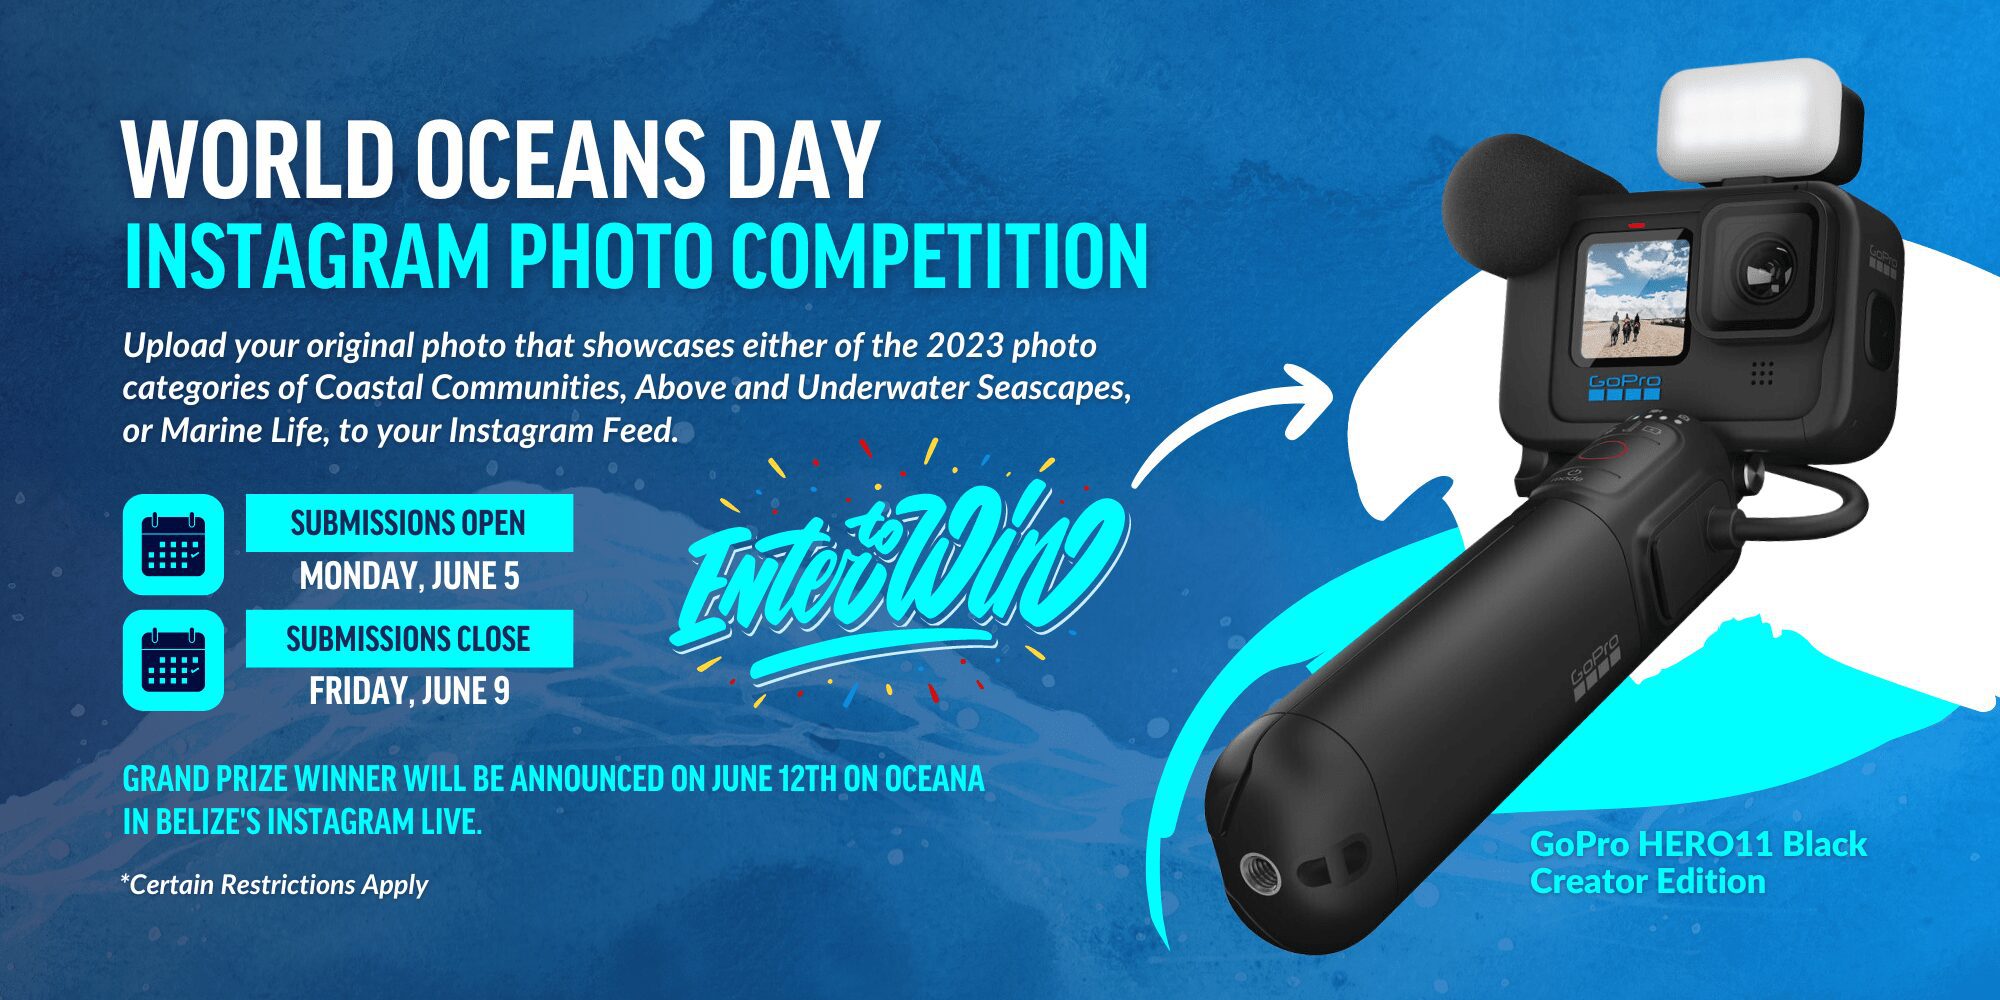 2023 World Oceans Day Instagram Photography Competition - Oceana Belize